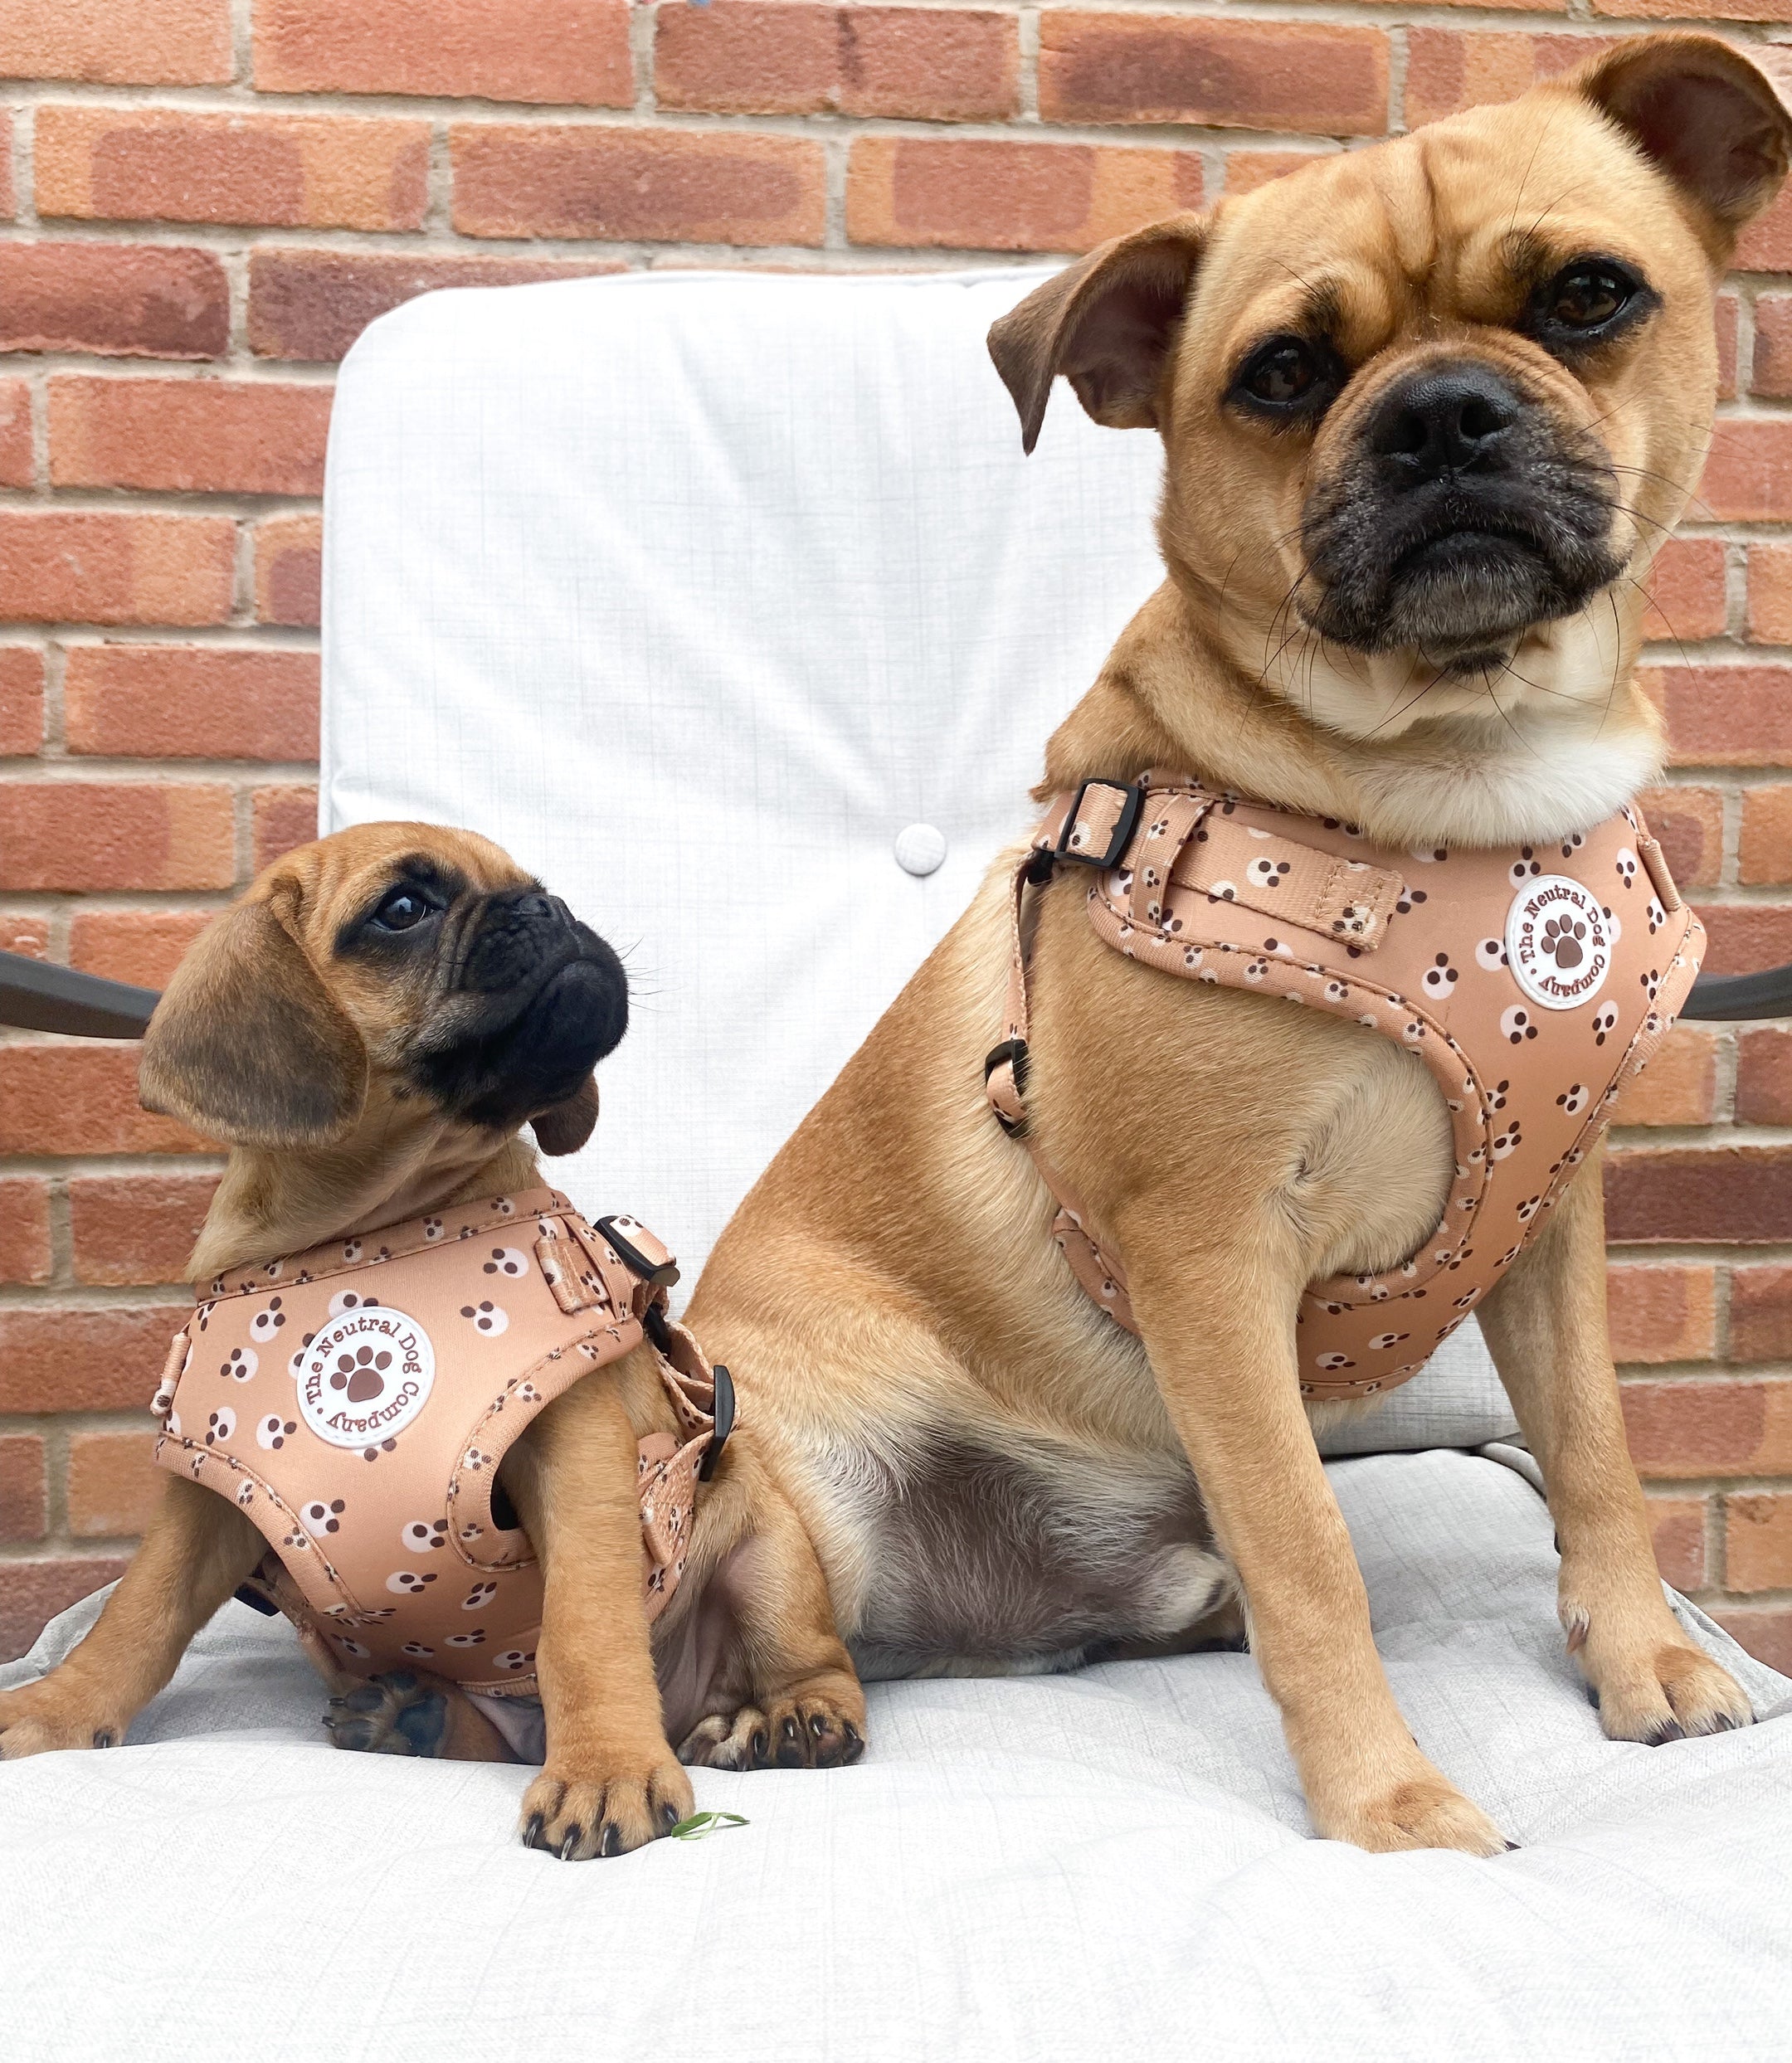 Adjustable Step-in Harness - Cookie Dough - The Neutral Dog Company